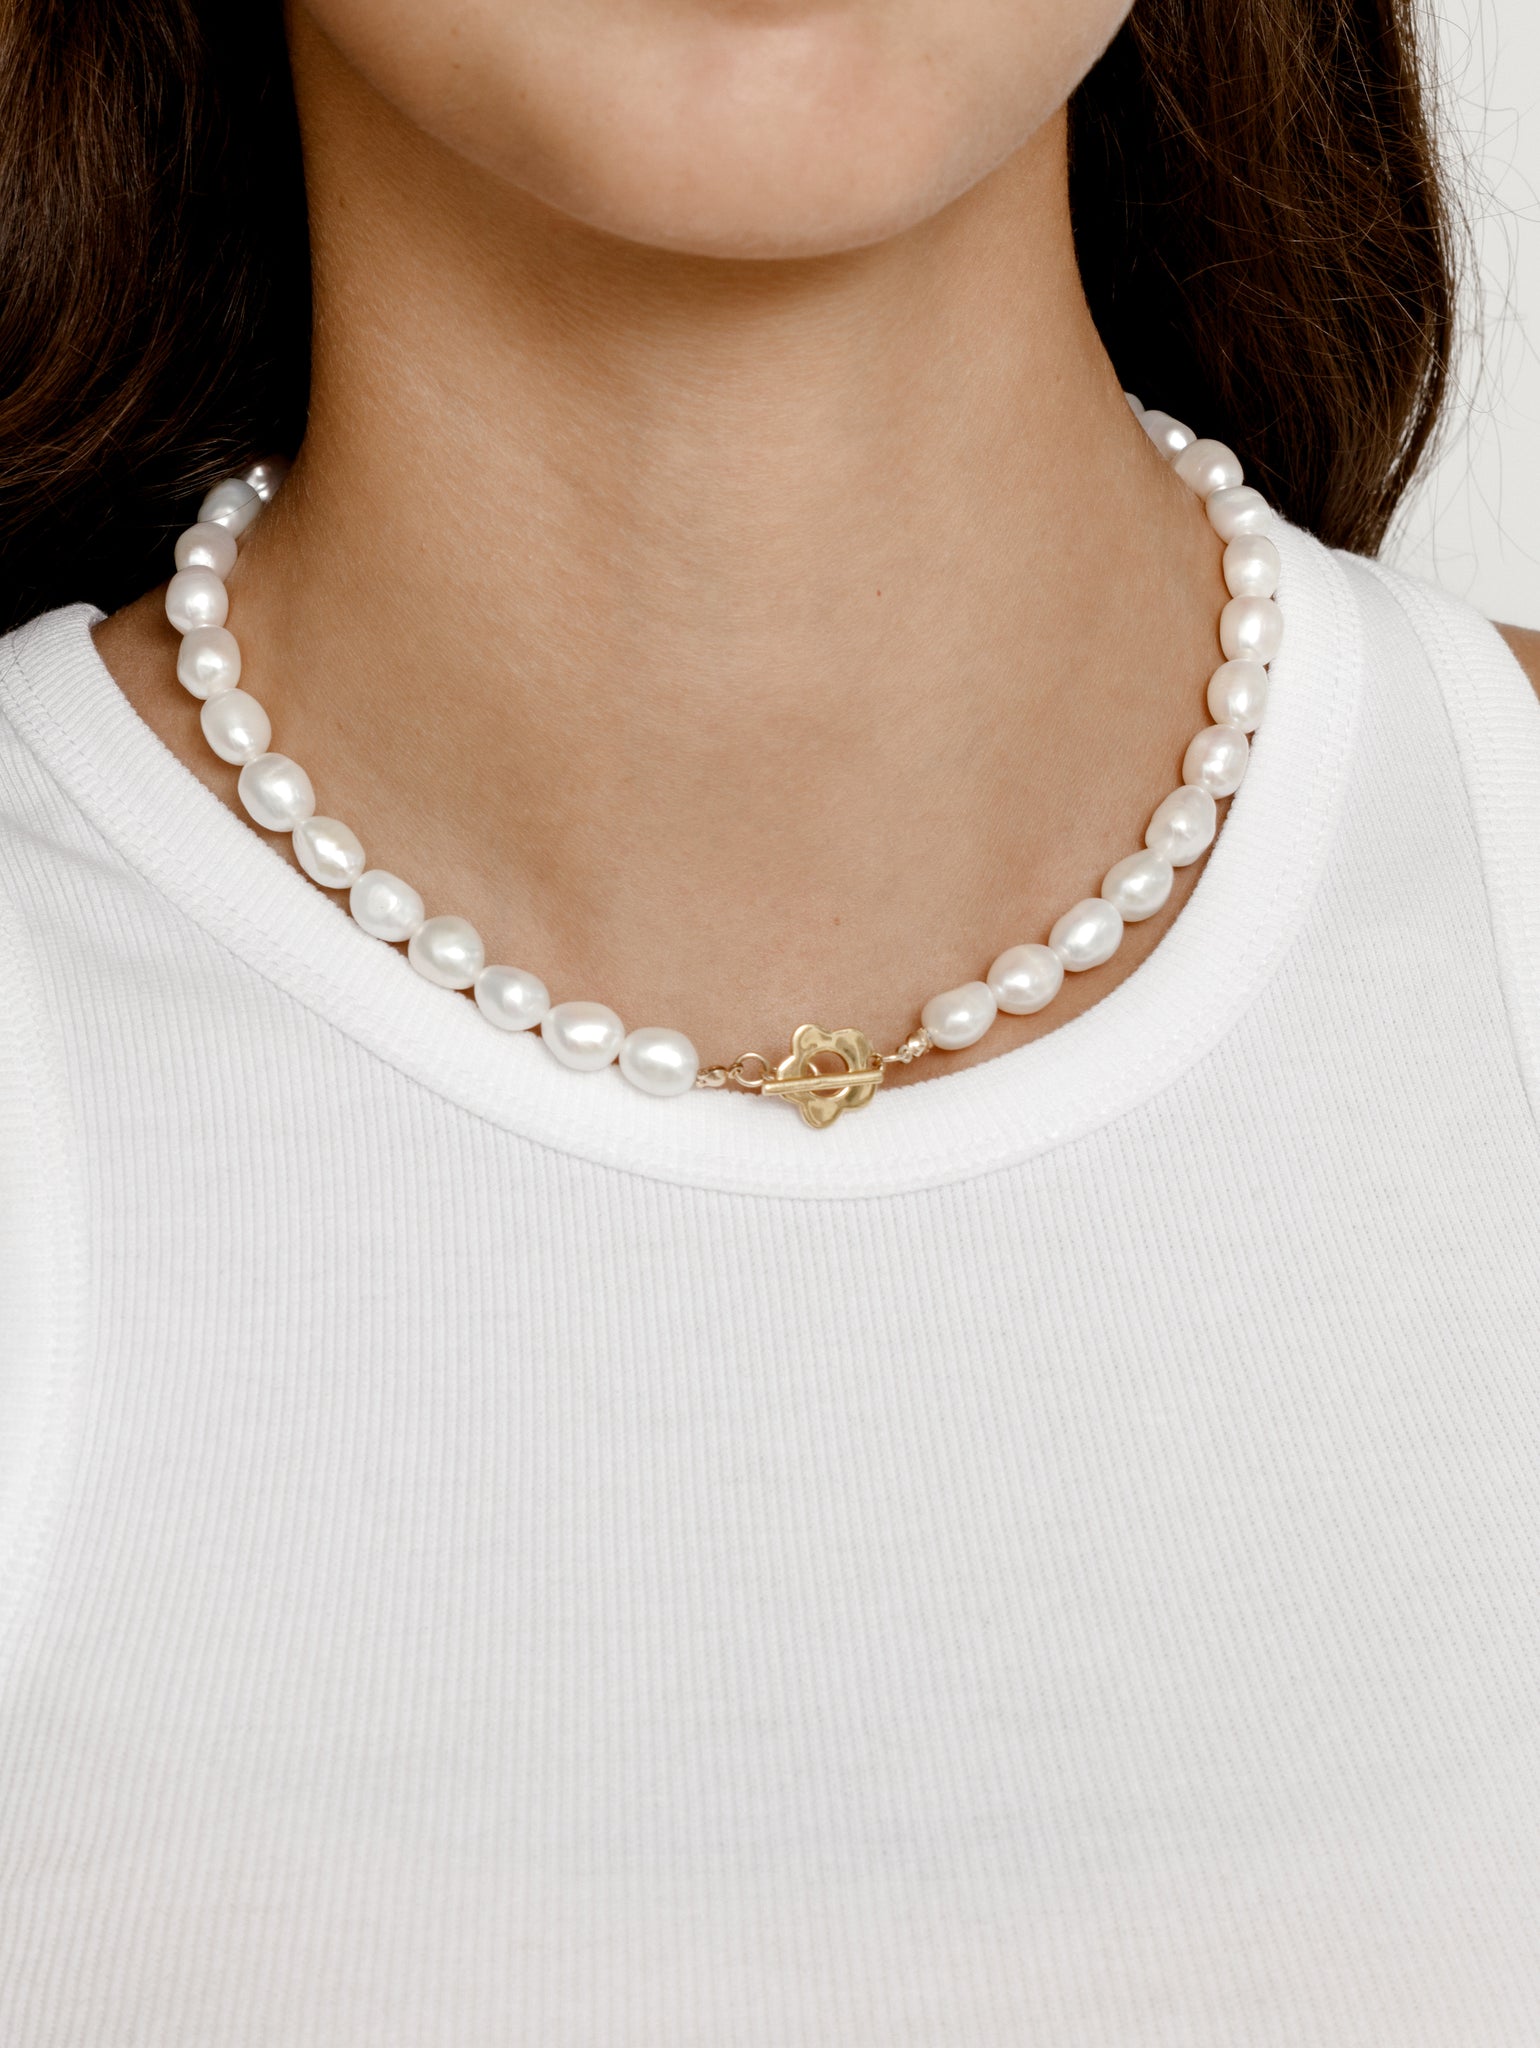 Lola Pearl Necklace in Gold